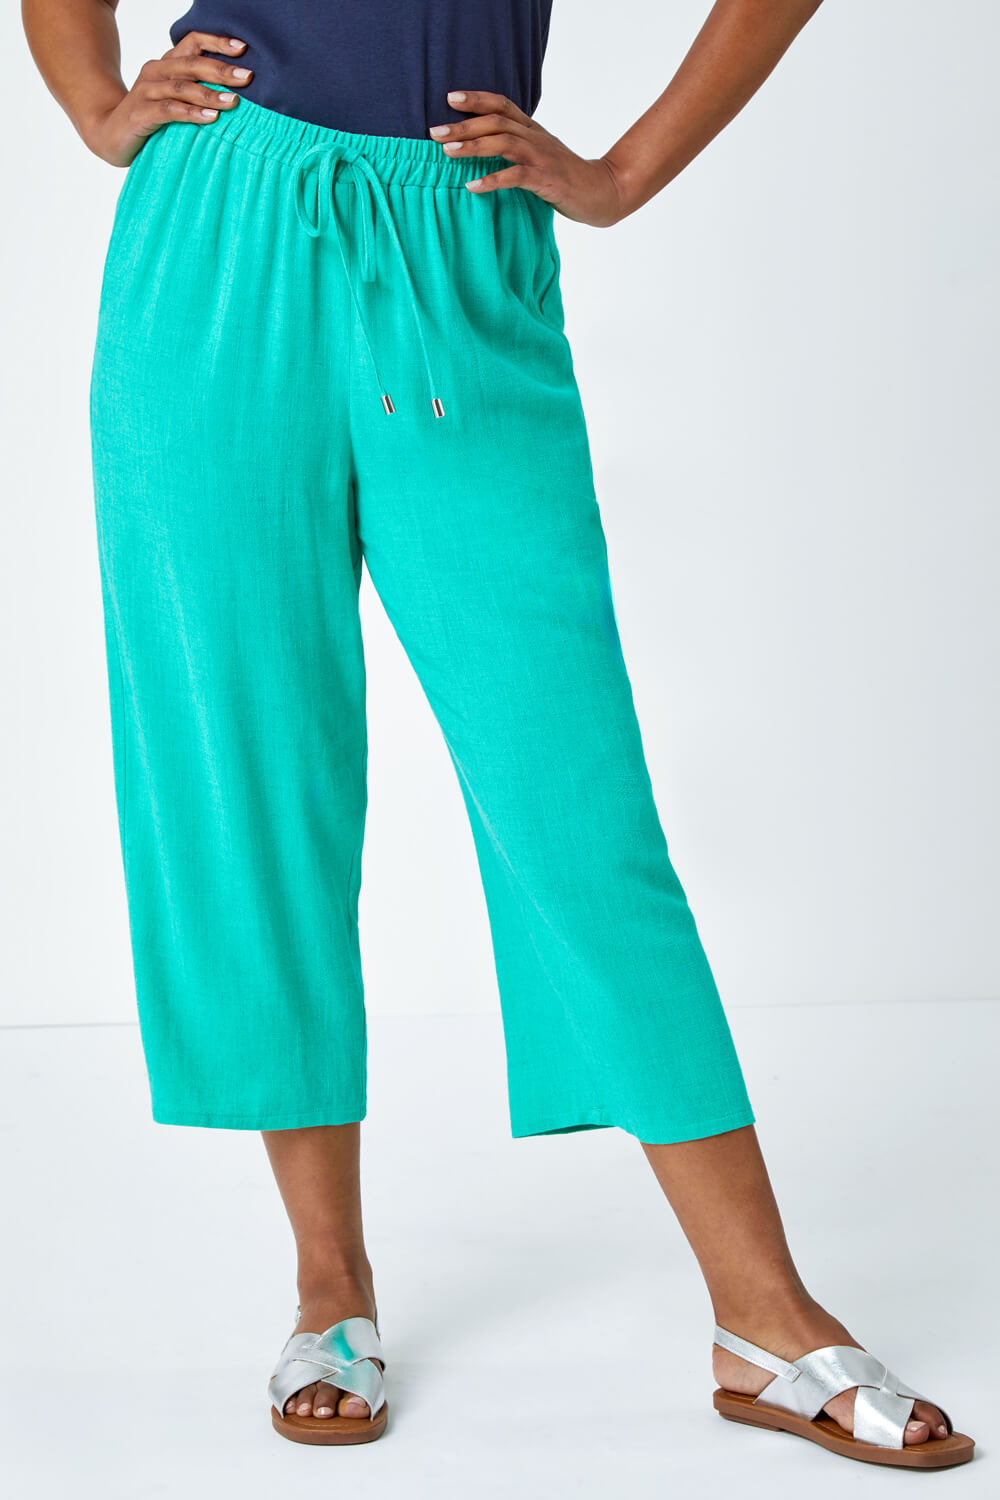 Jade Petite Linen Mix Wide Cropped Trousers, Image 4 of 5